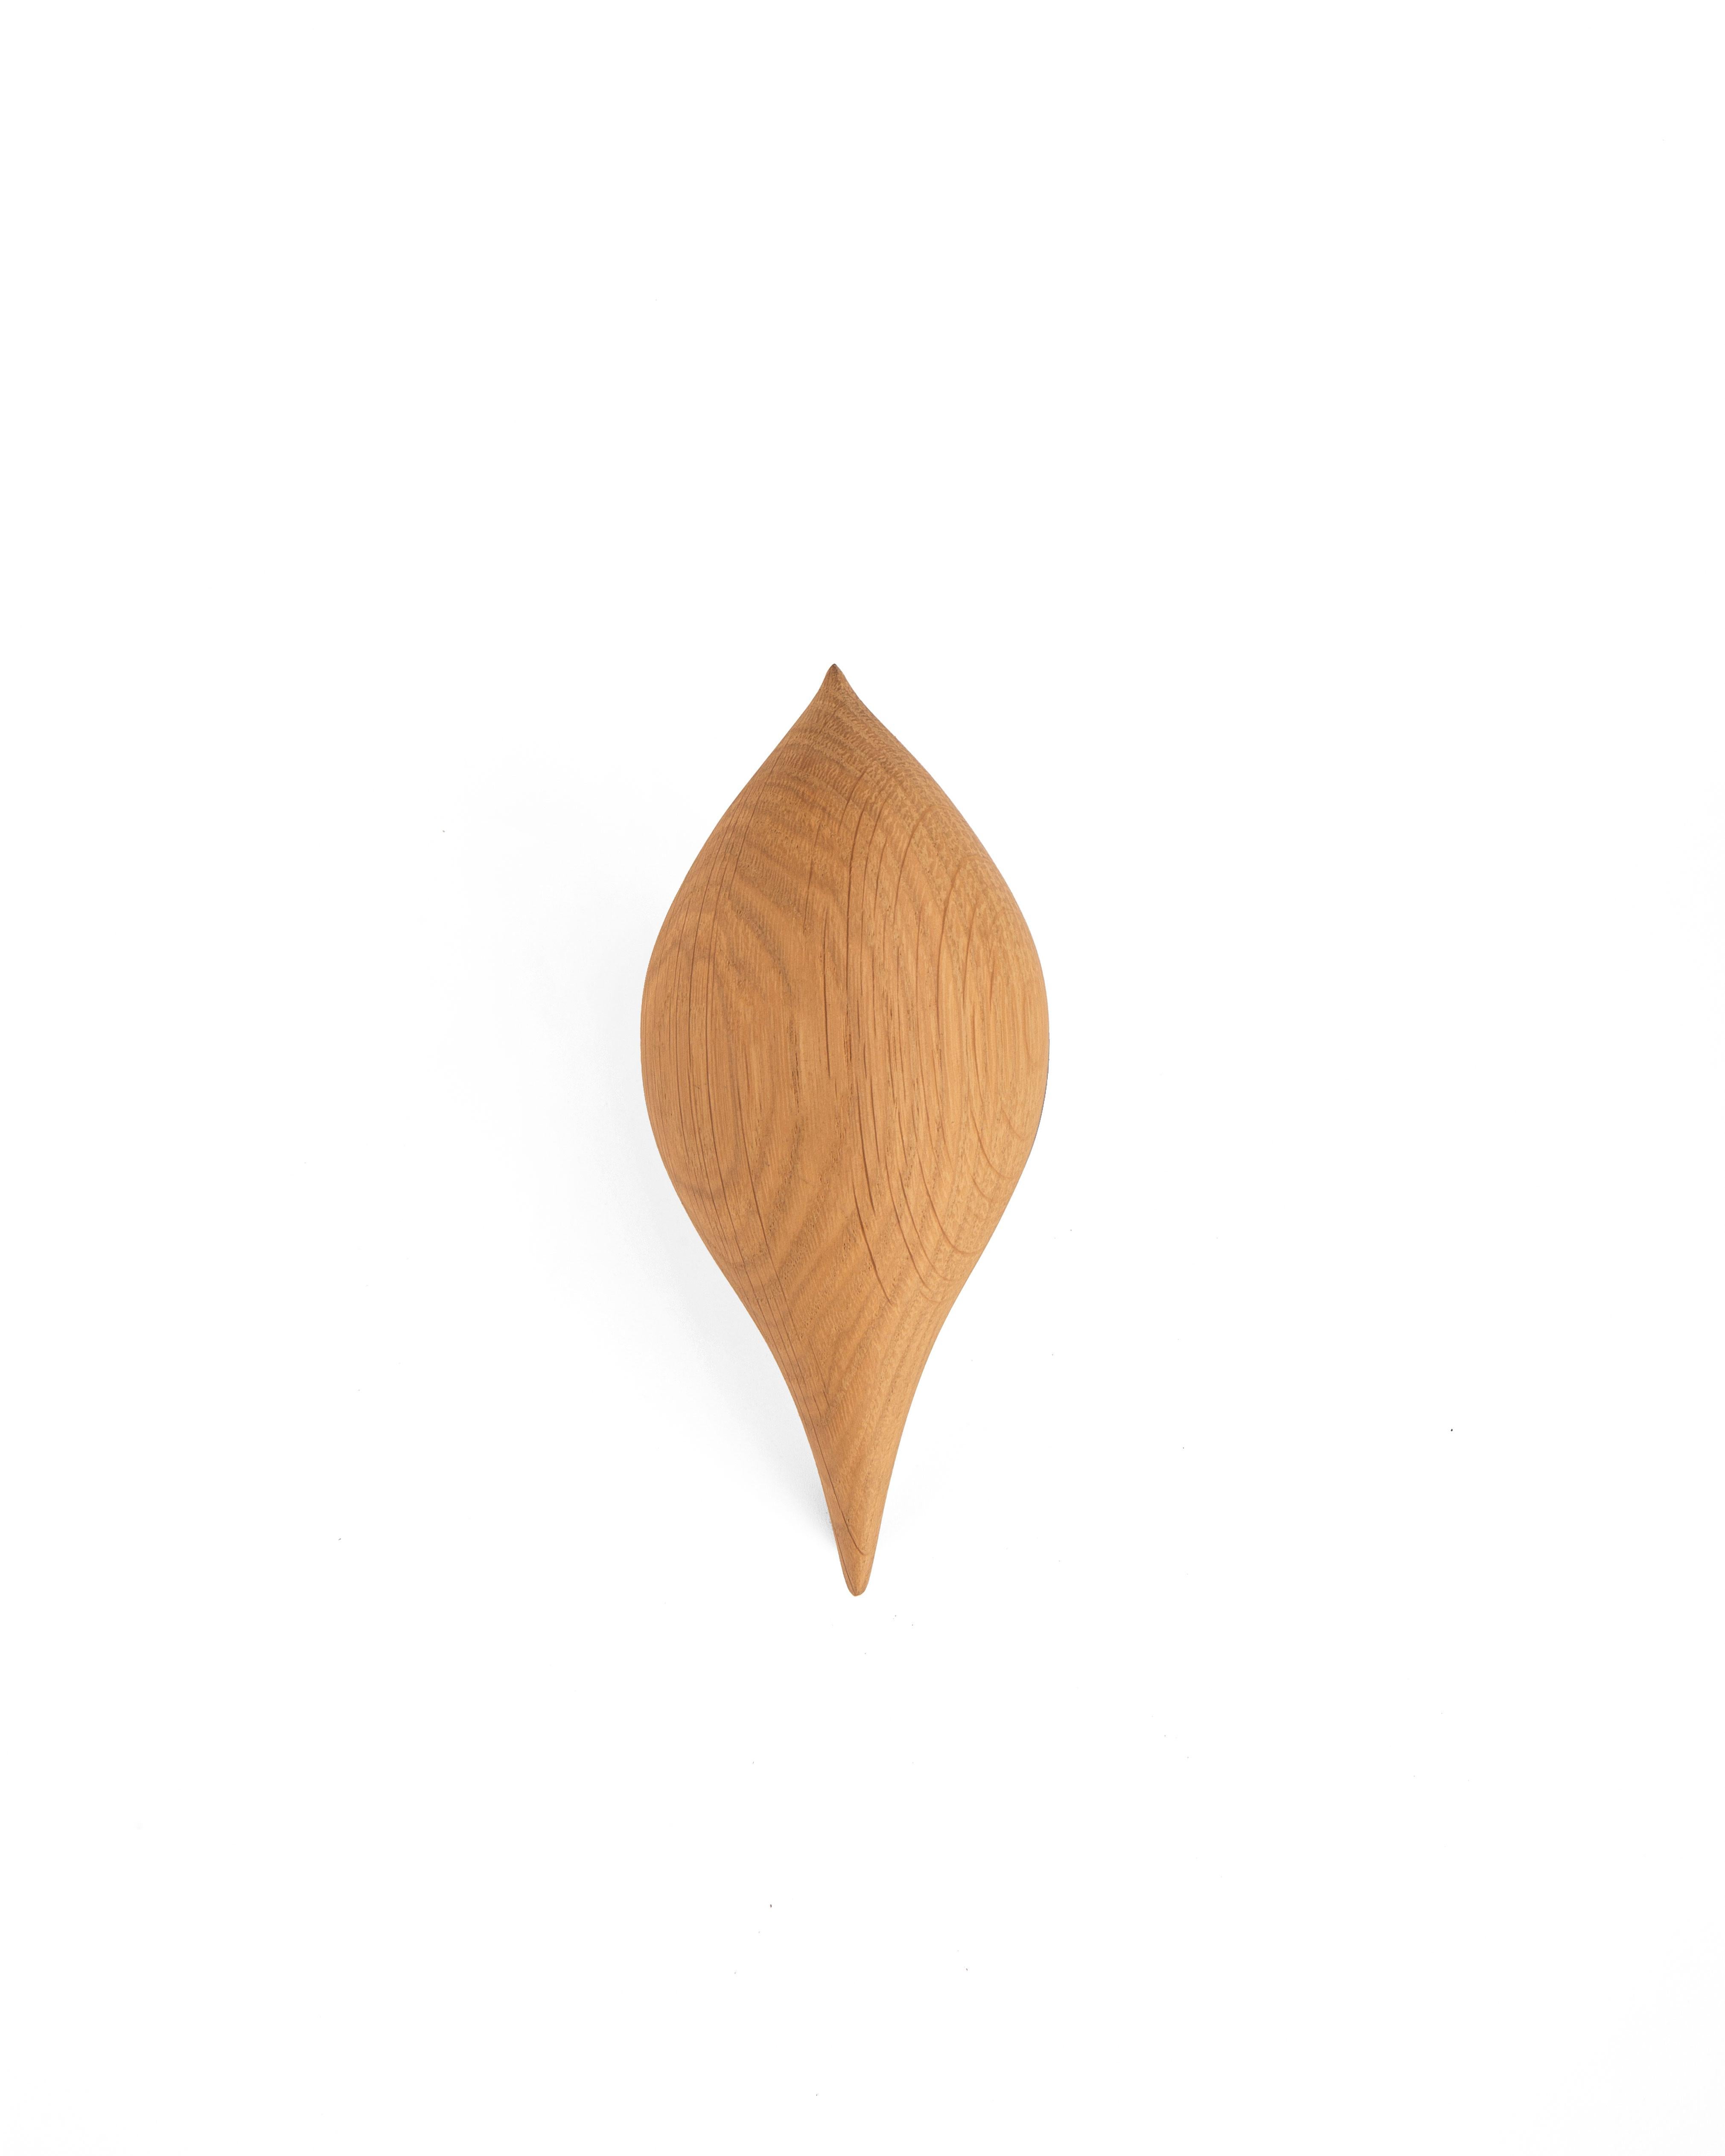 Hand-Crafted Handcrafted Tweety Decorative Bird CS4 by Noom in Natural Oak (in stock)